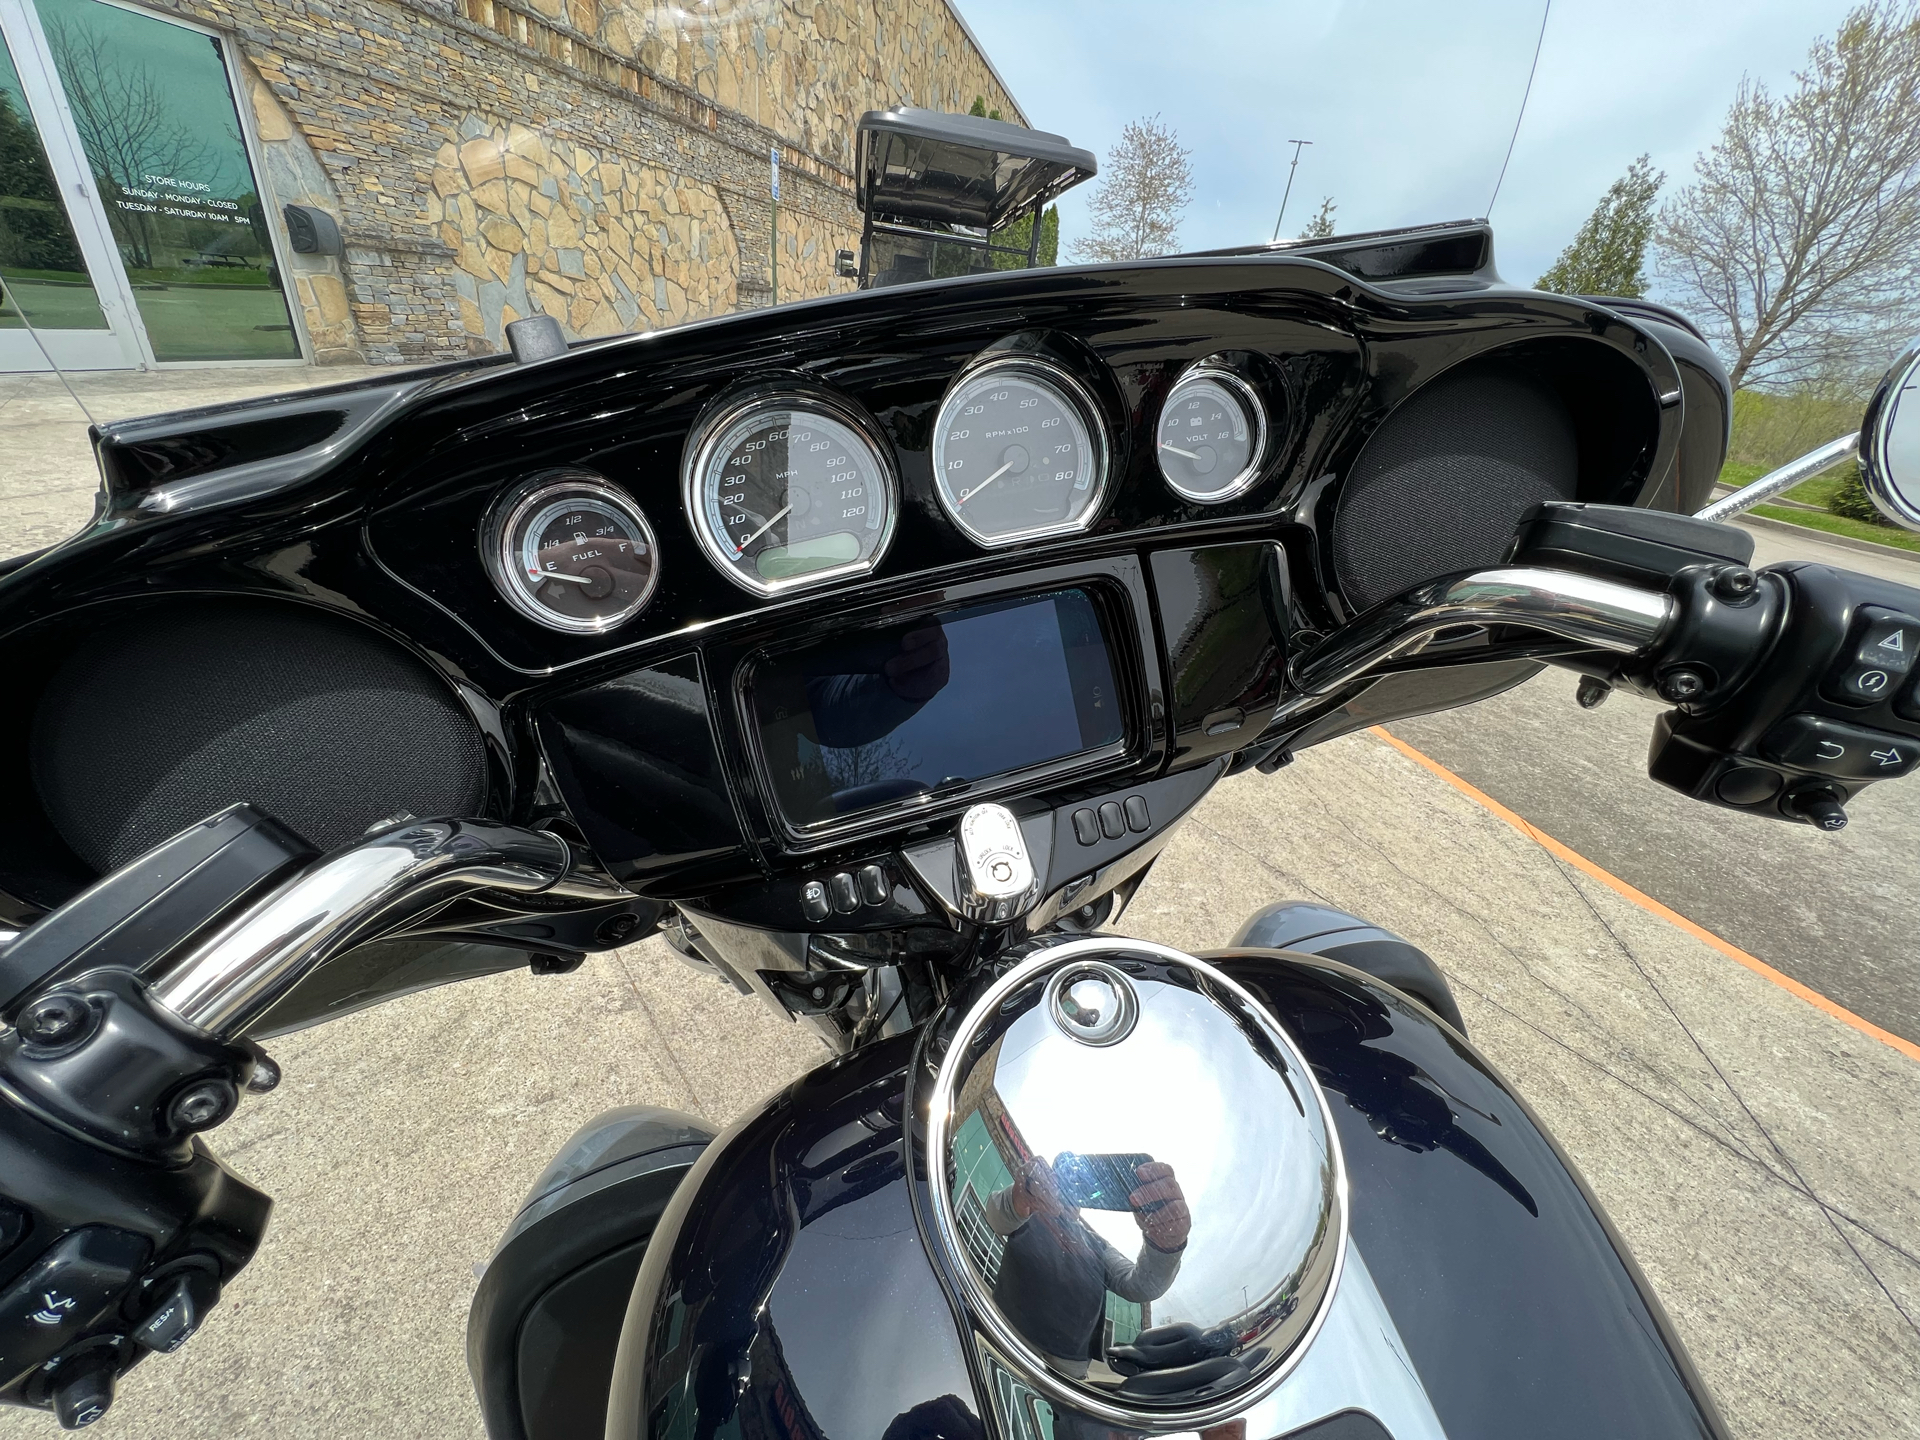 2019 Harley-Davidson FLHTK Ultra Limited in Columbia, Tennessee - Photo 7